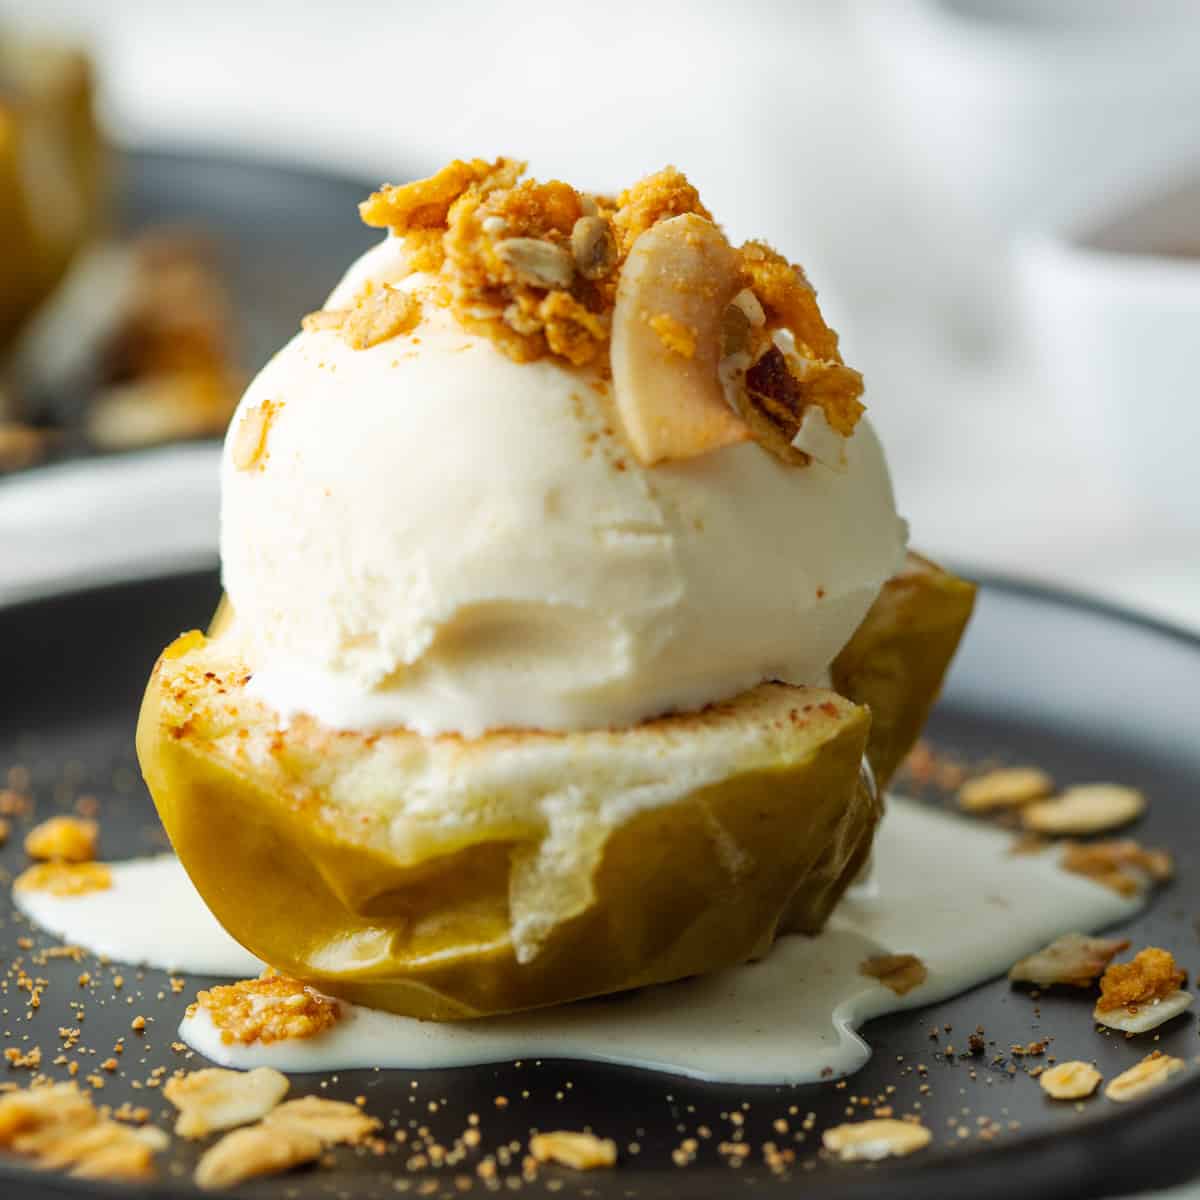 Vegan Baked apple half served with ice cream and granola.
